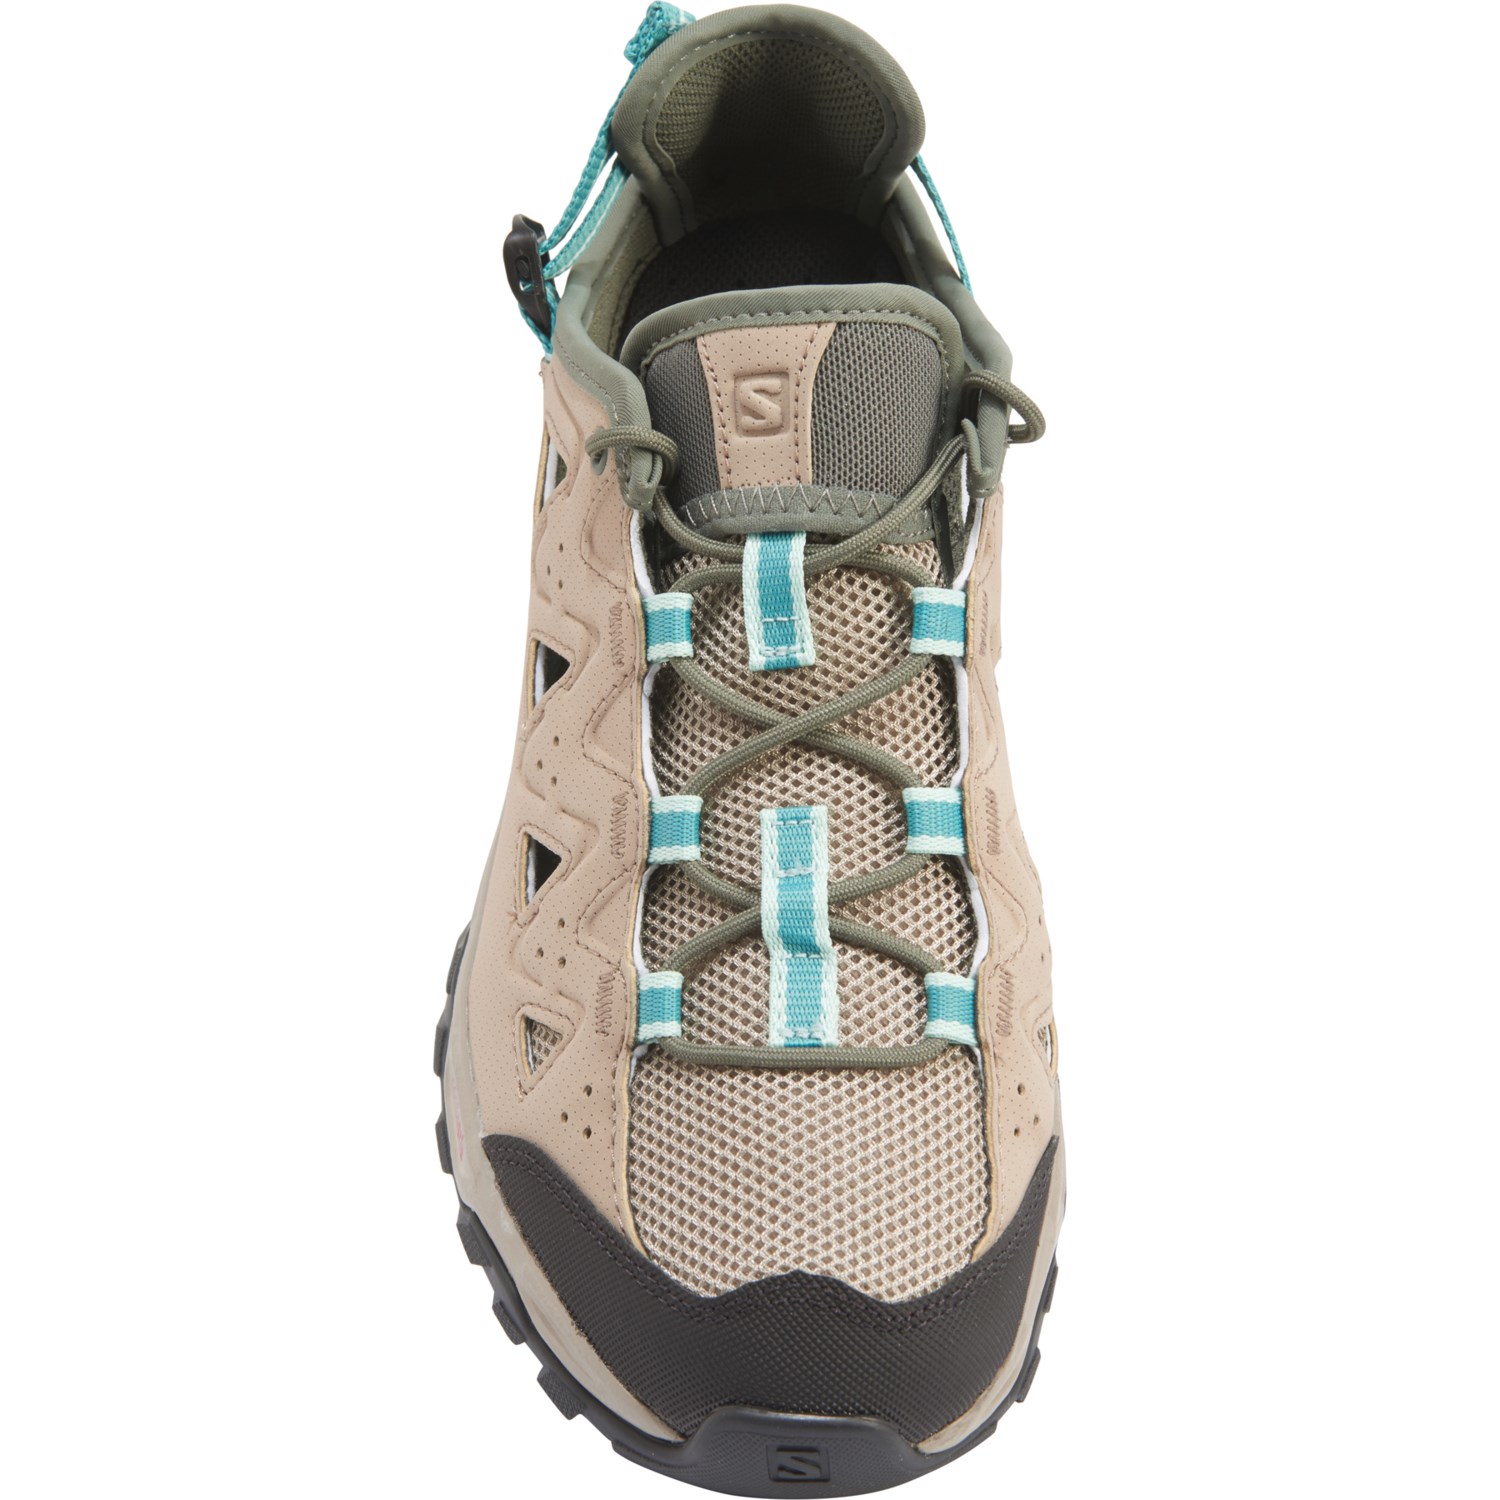 Salomon Alhama Water Shoes (For Women) - Save 26%